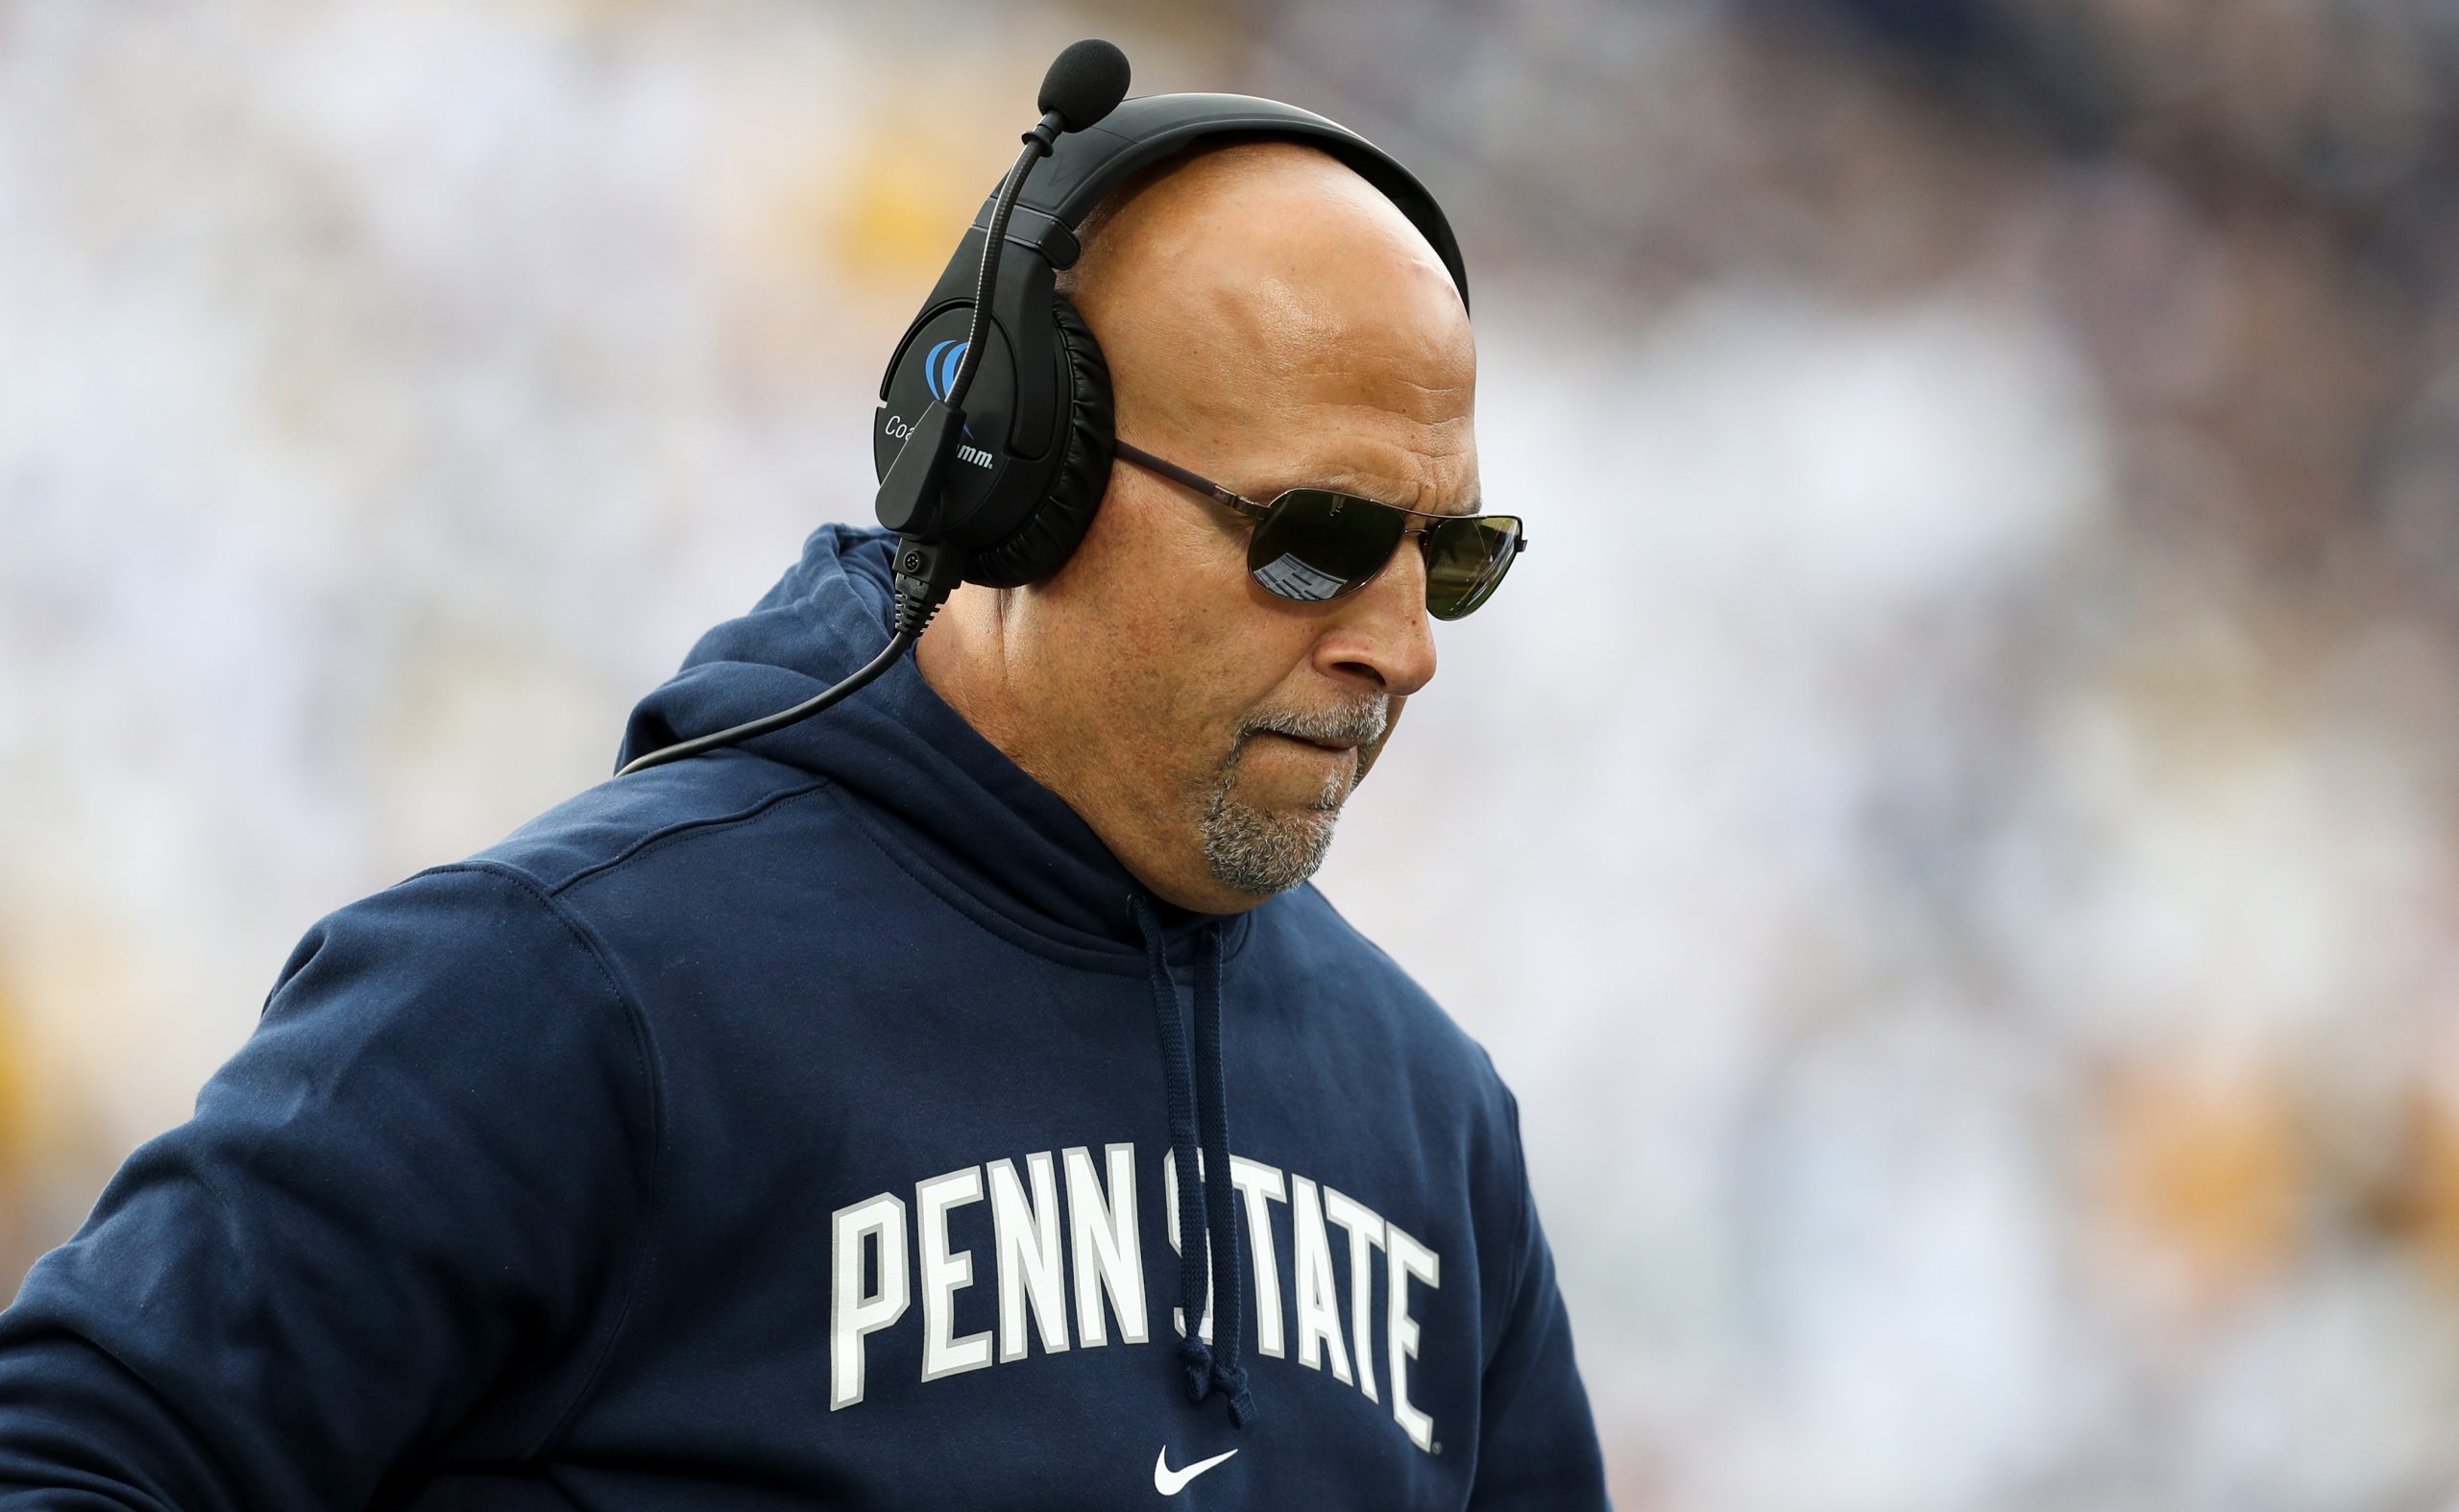 Penn State coach James Franklin had a testy exchange with a reporter in the press conference after Saturday's loss to Michigan. Photo Credit: Matthew O'Haren-USA TODAY Sports